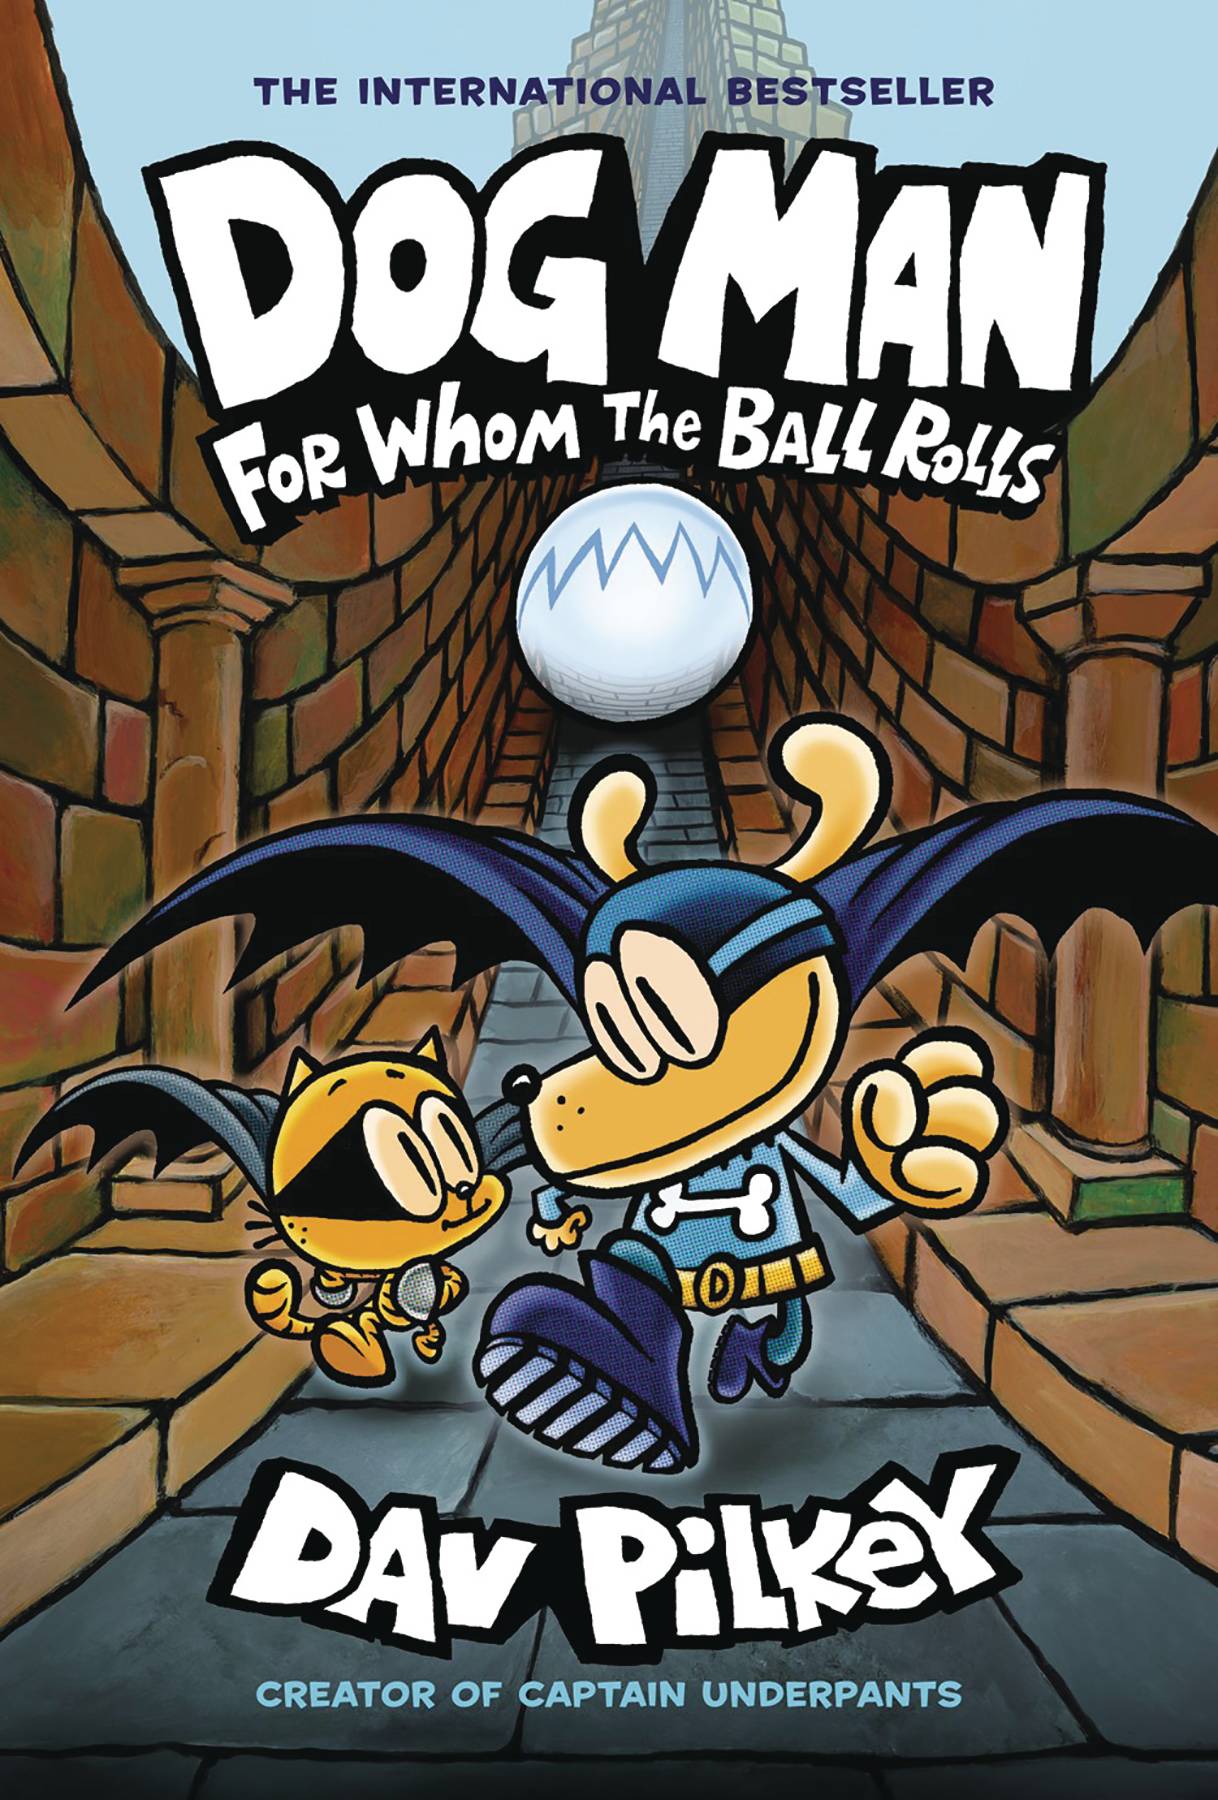 Dog Man Vol. 07 For Whom the Ball Rolls